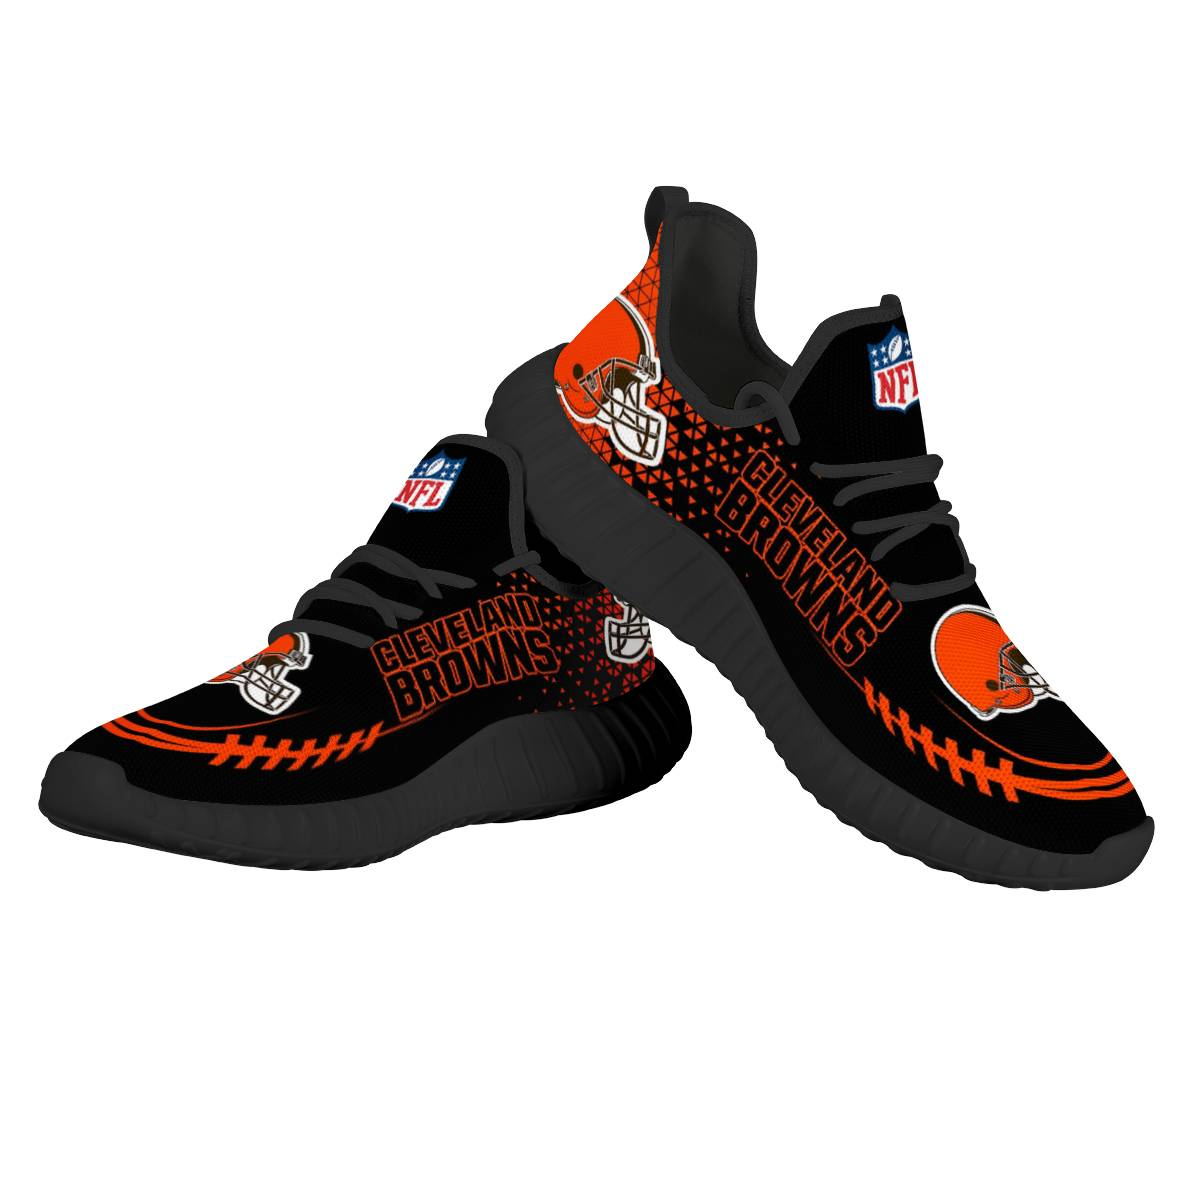 Men's NFL Cleveland Browns Mesh Knit Sneakers/Shoes 003